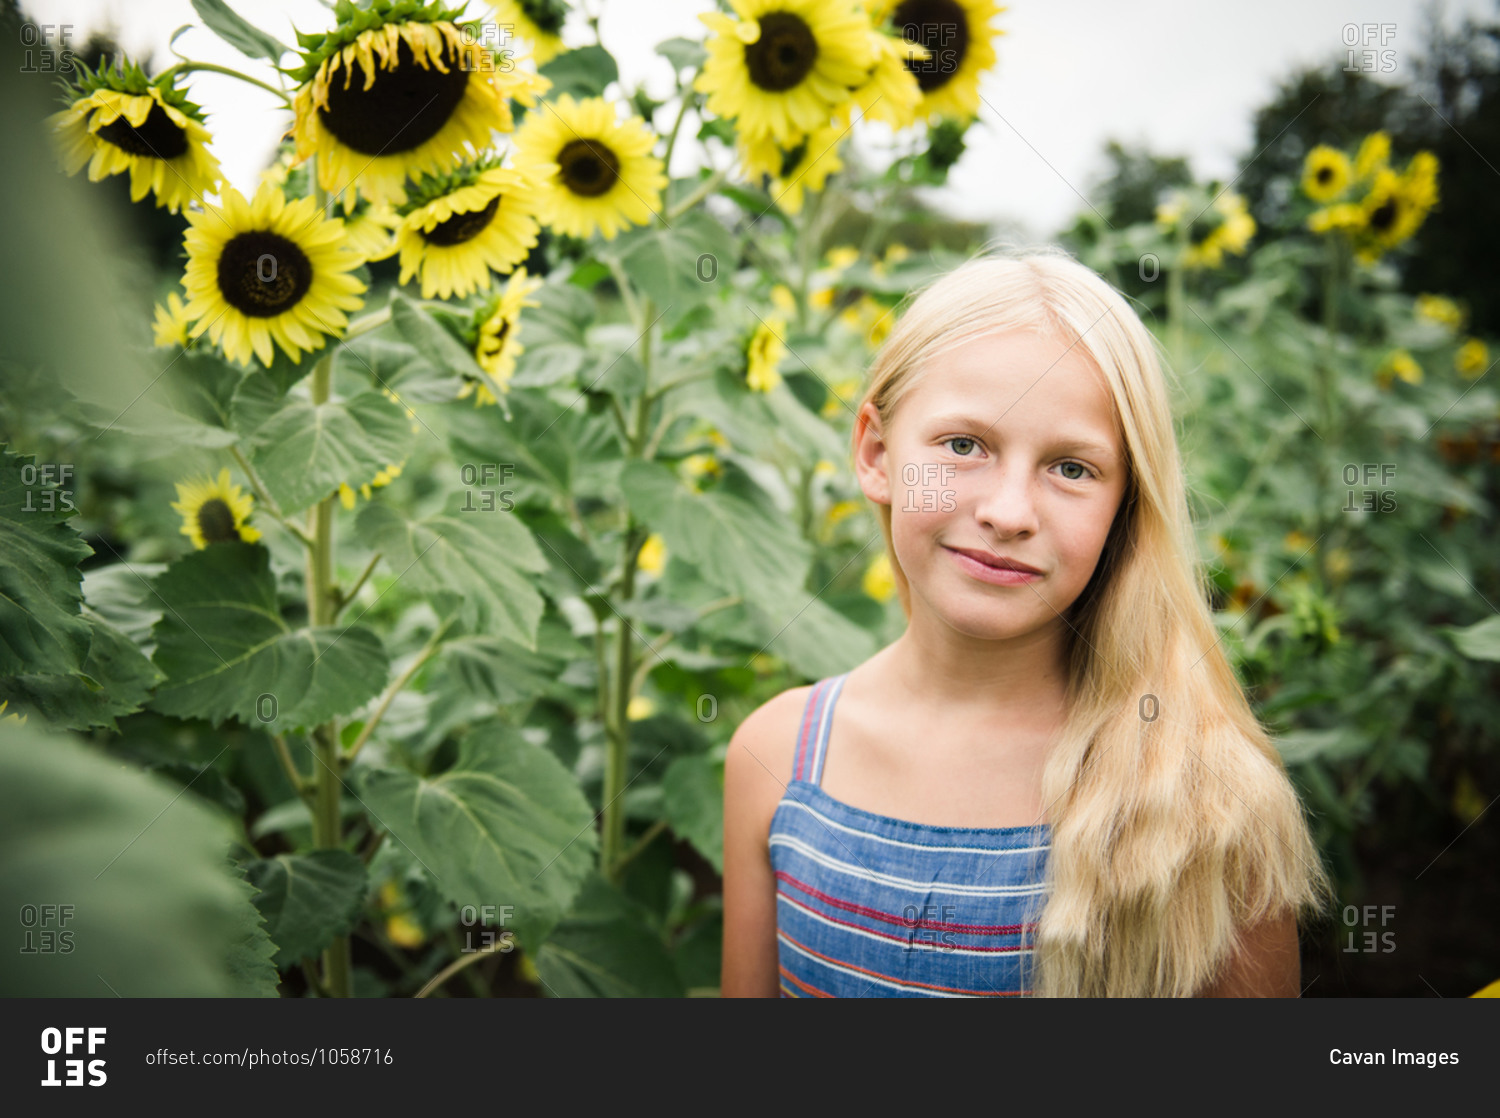 Young Girl Standing in Sunflower Field Next to Tall Yellow Sunflowers